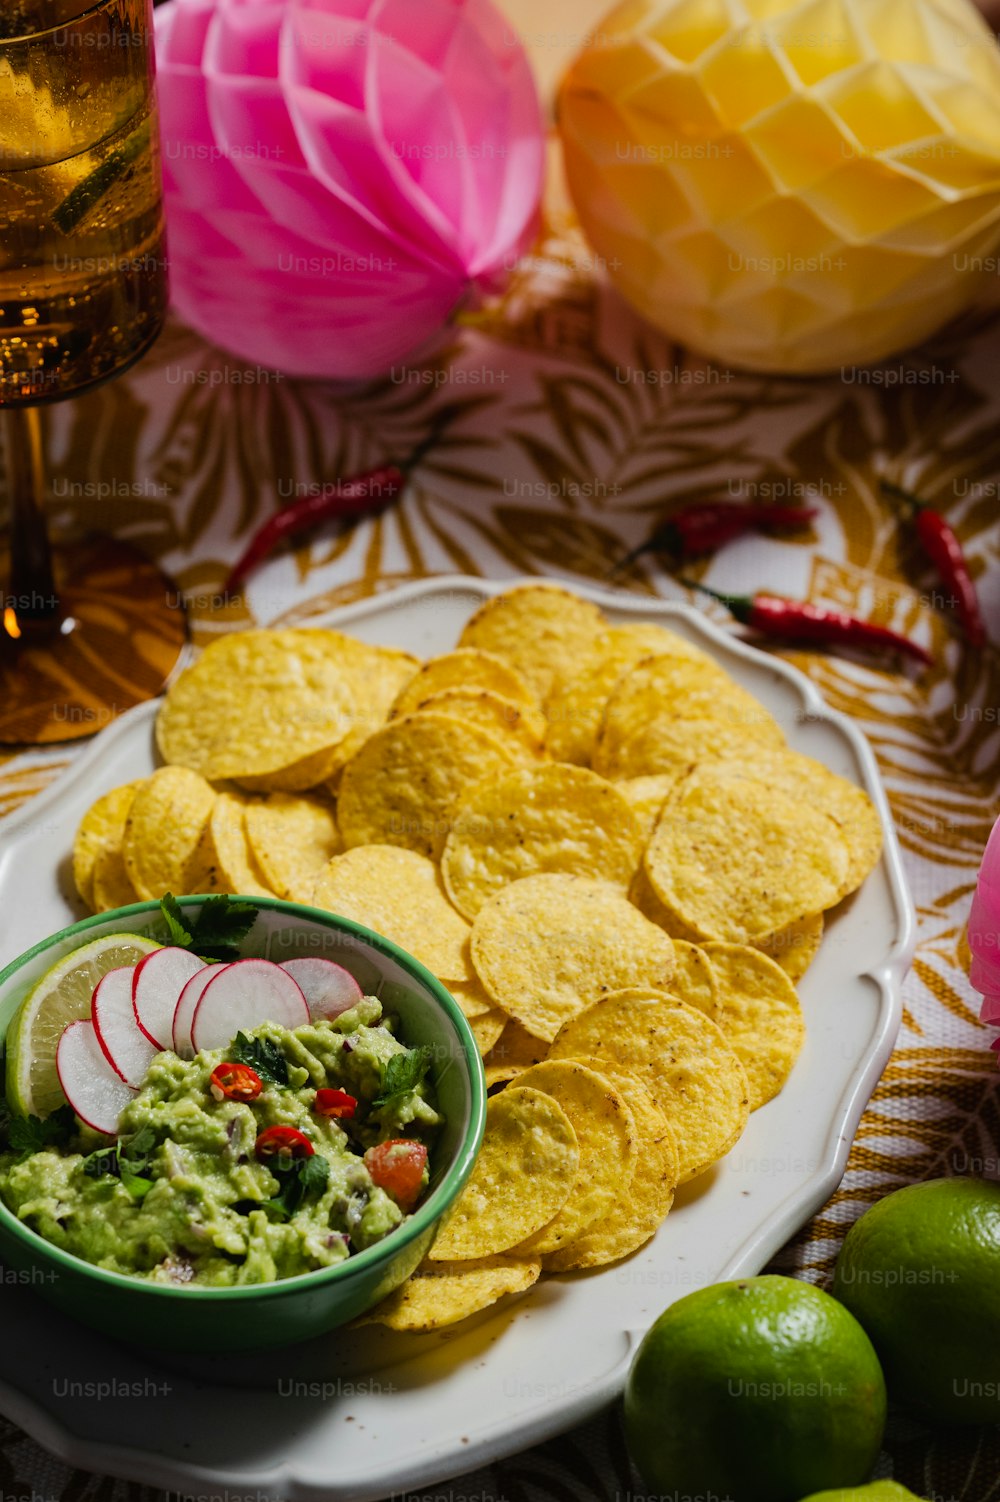 a plate of chips, guacamole, and radishes on a